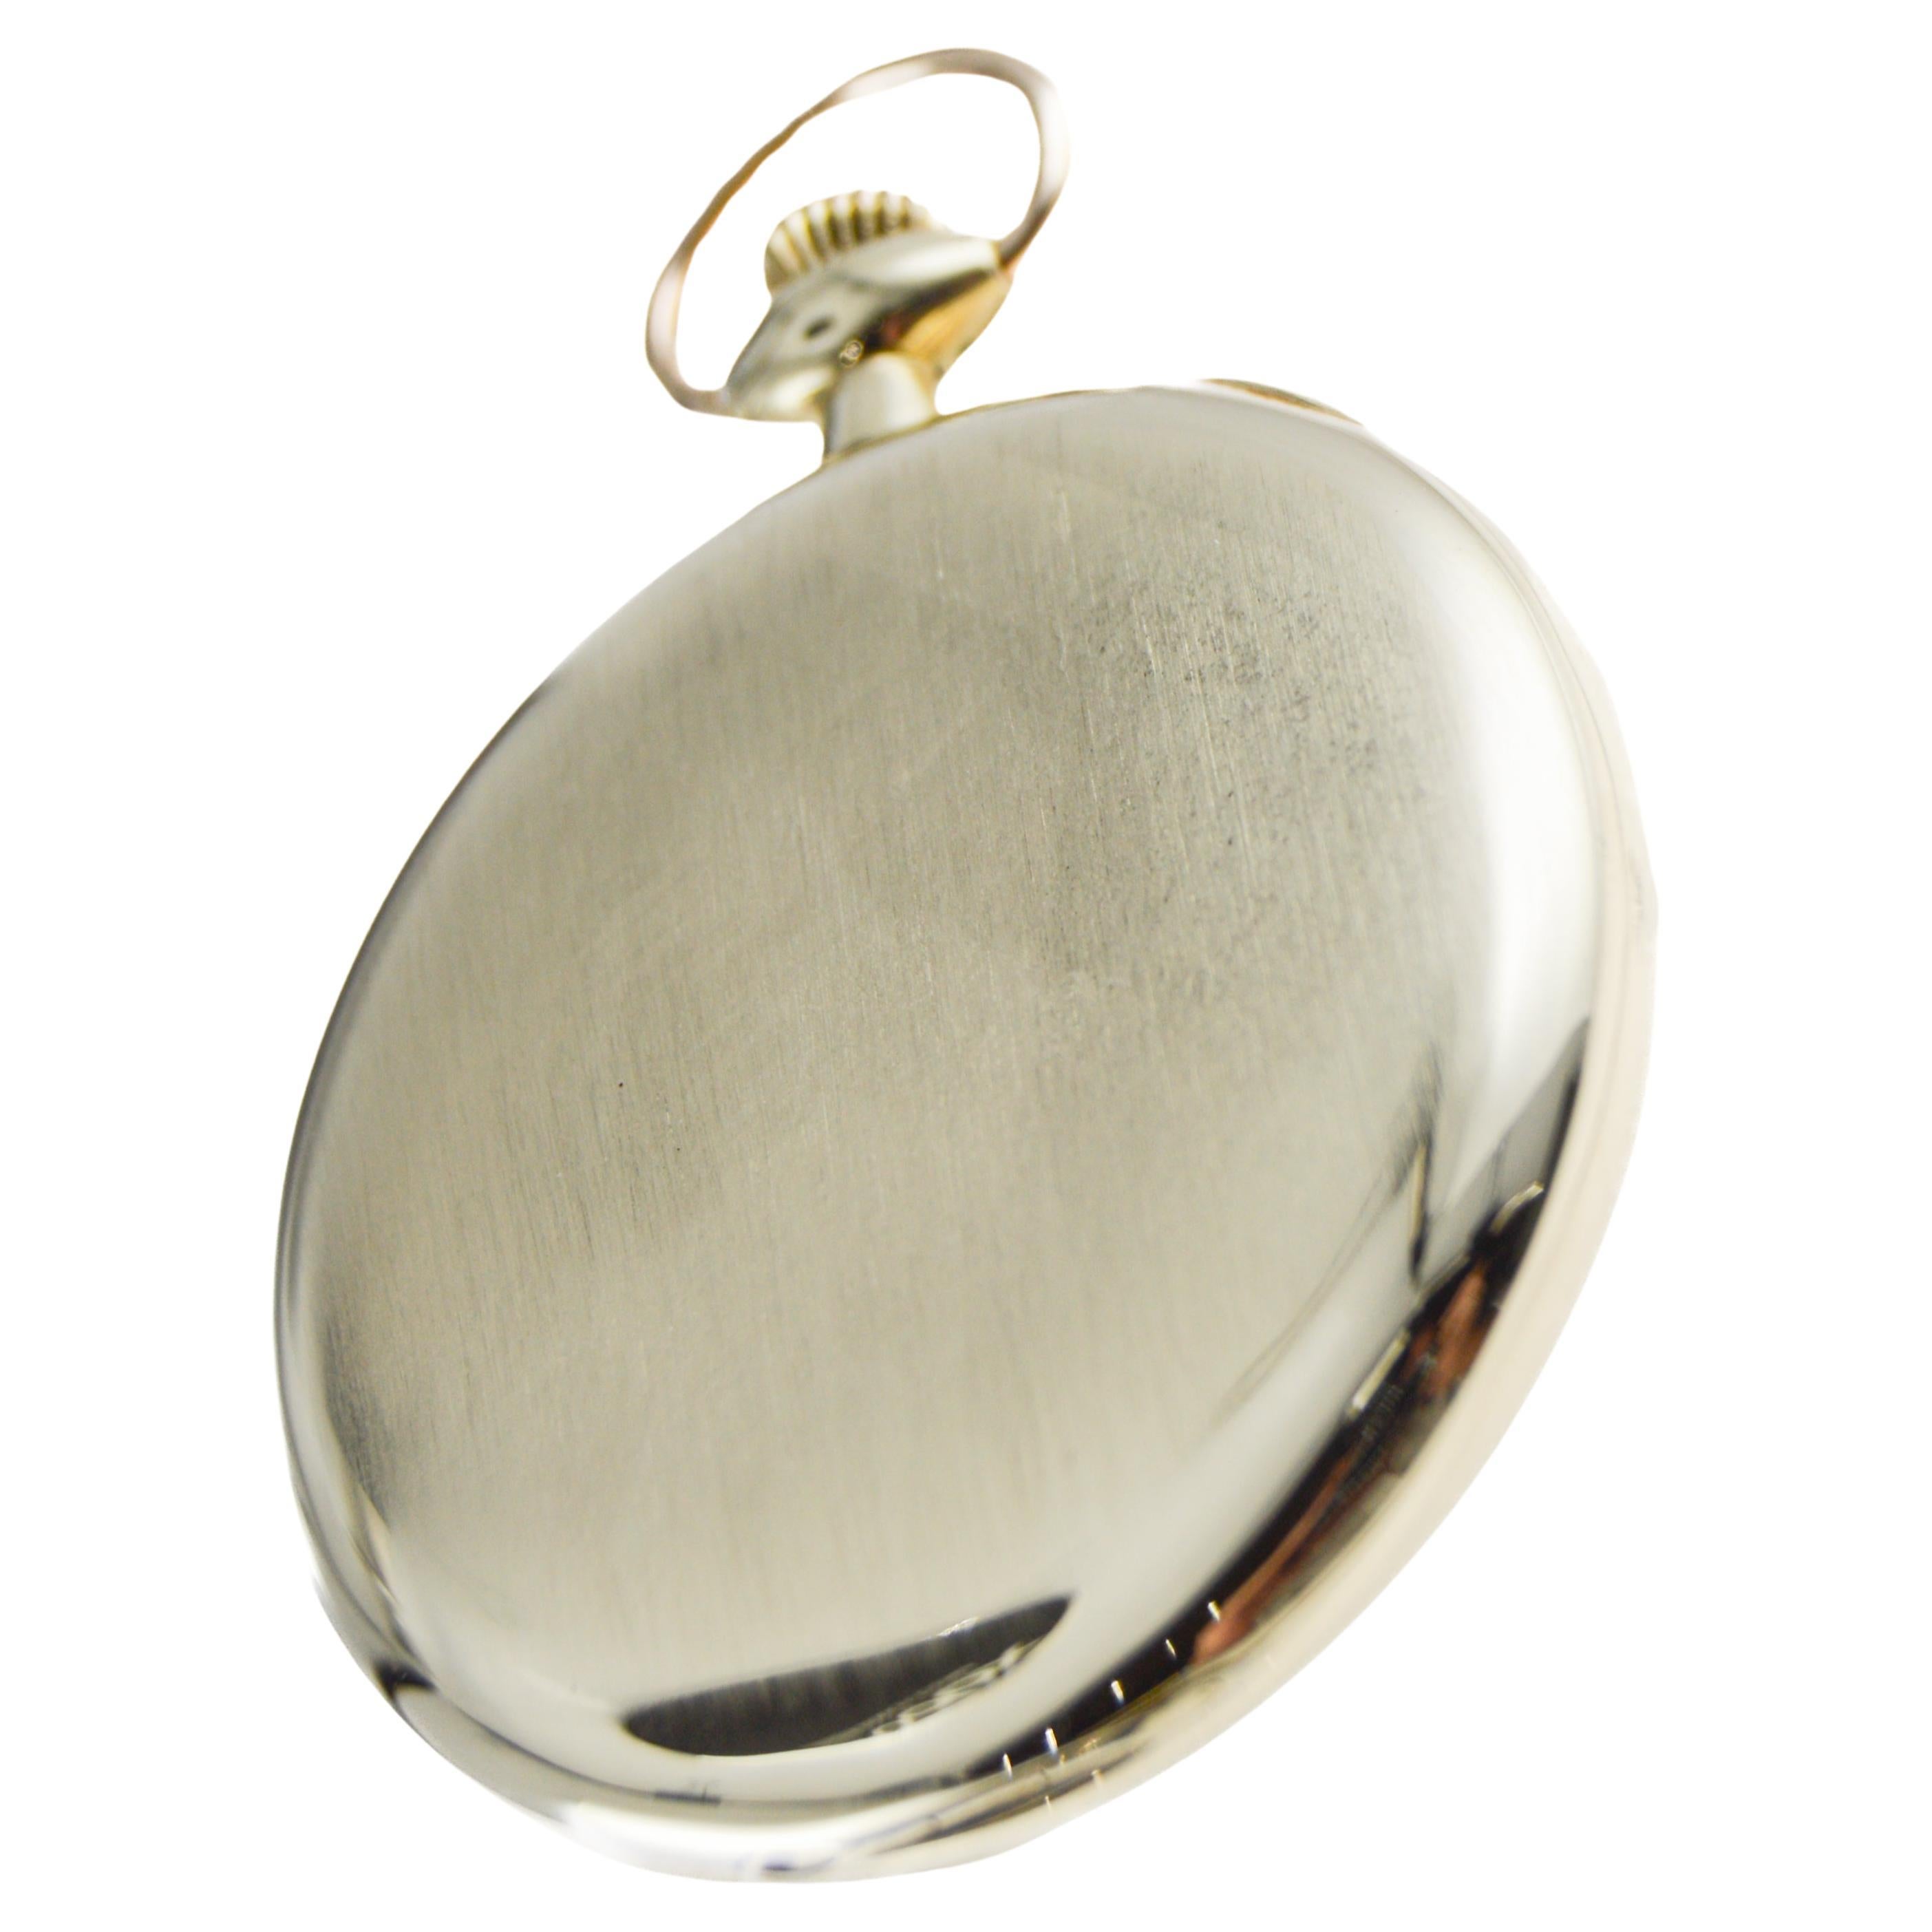 Gruen  Solid Yellow Gold Pocket Watch with Original Dial by Stern Freres 1920's For Sale 4